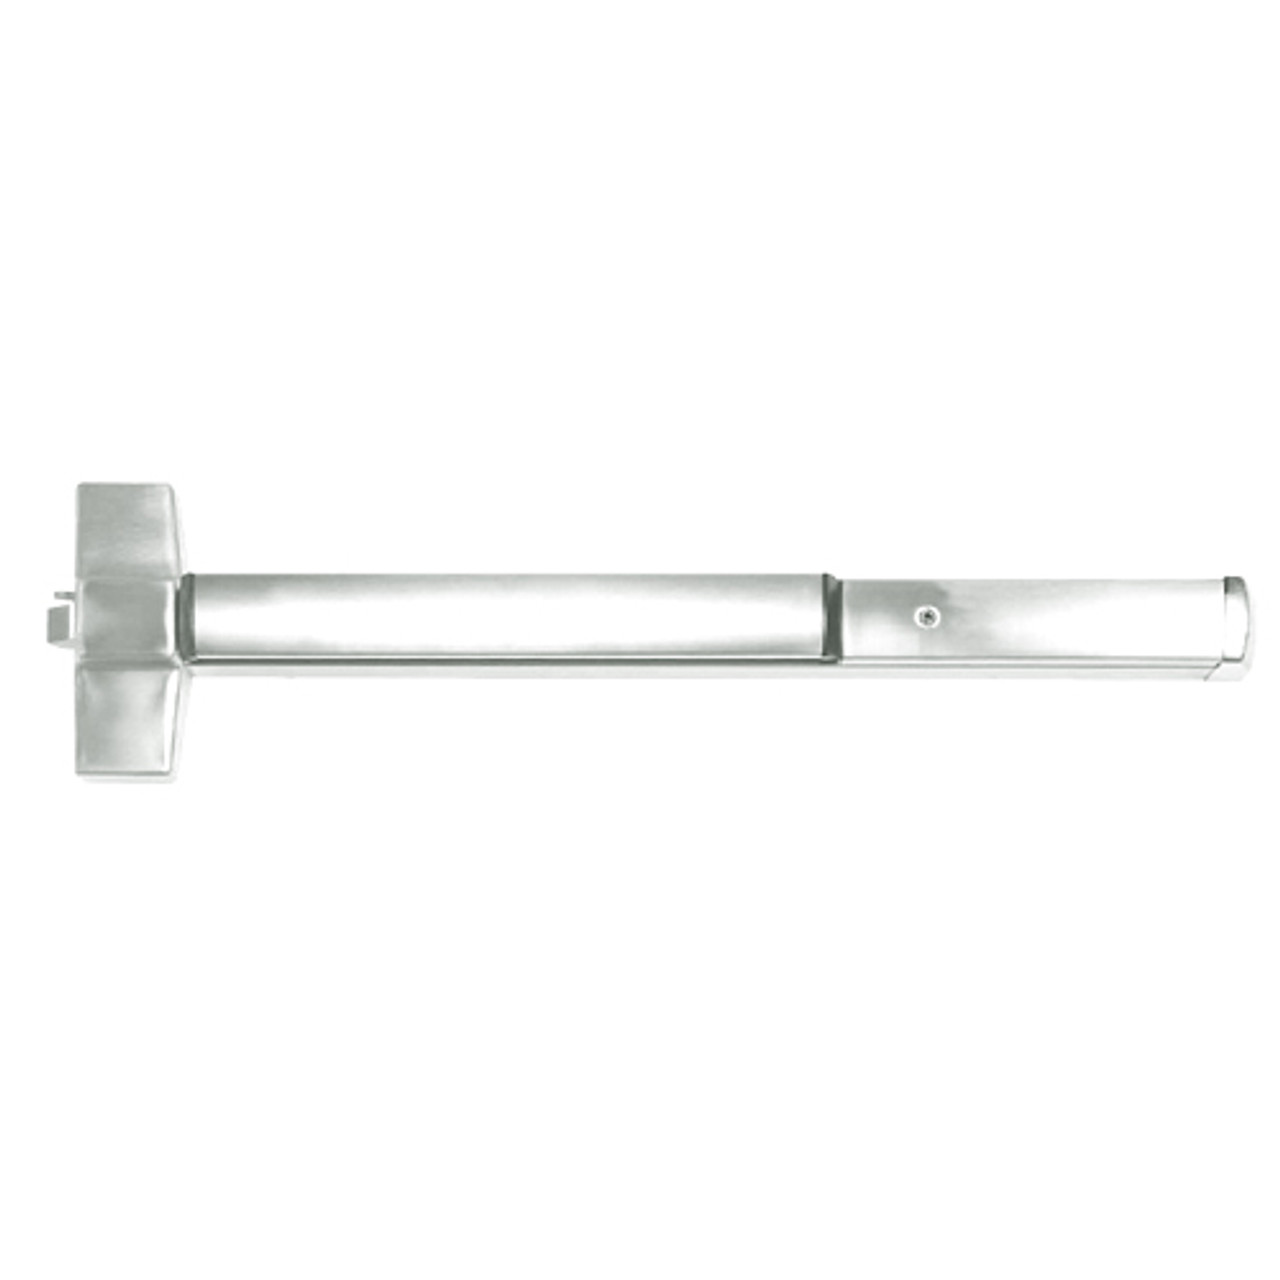 ED5200-618-W048-MELR-M92 Corbin ED5200 Series Non Fire Rated Exit Device with Motor Latch Retraction and Touchbar Monitoring in Bright Nickel Finish